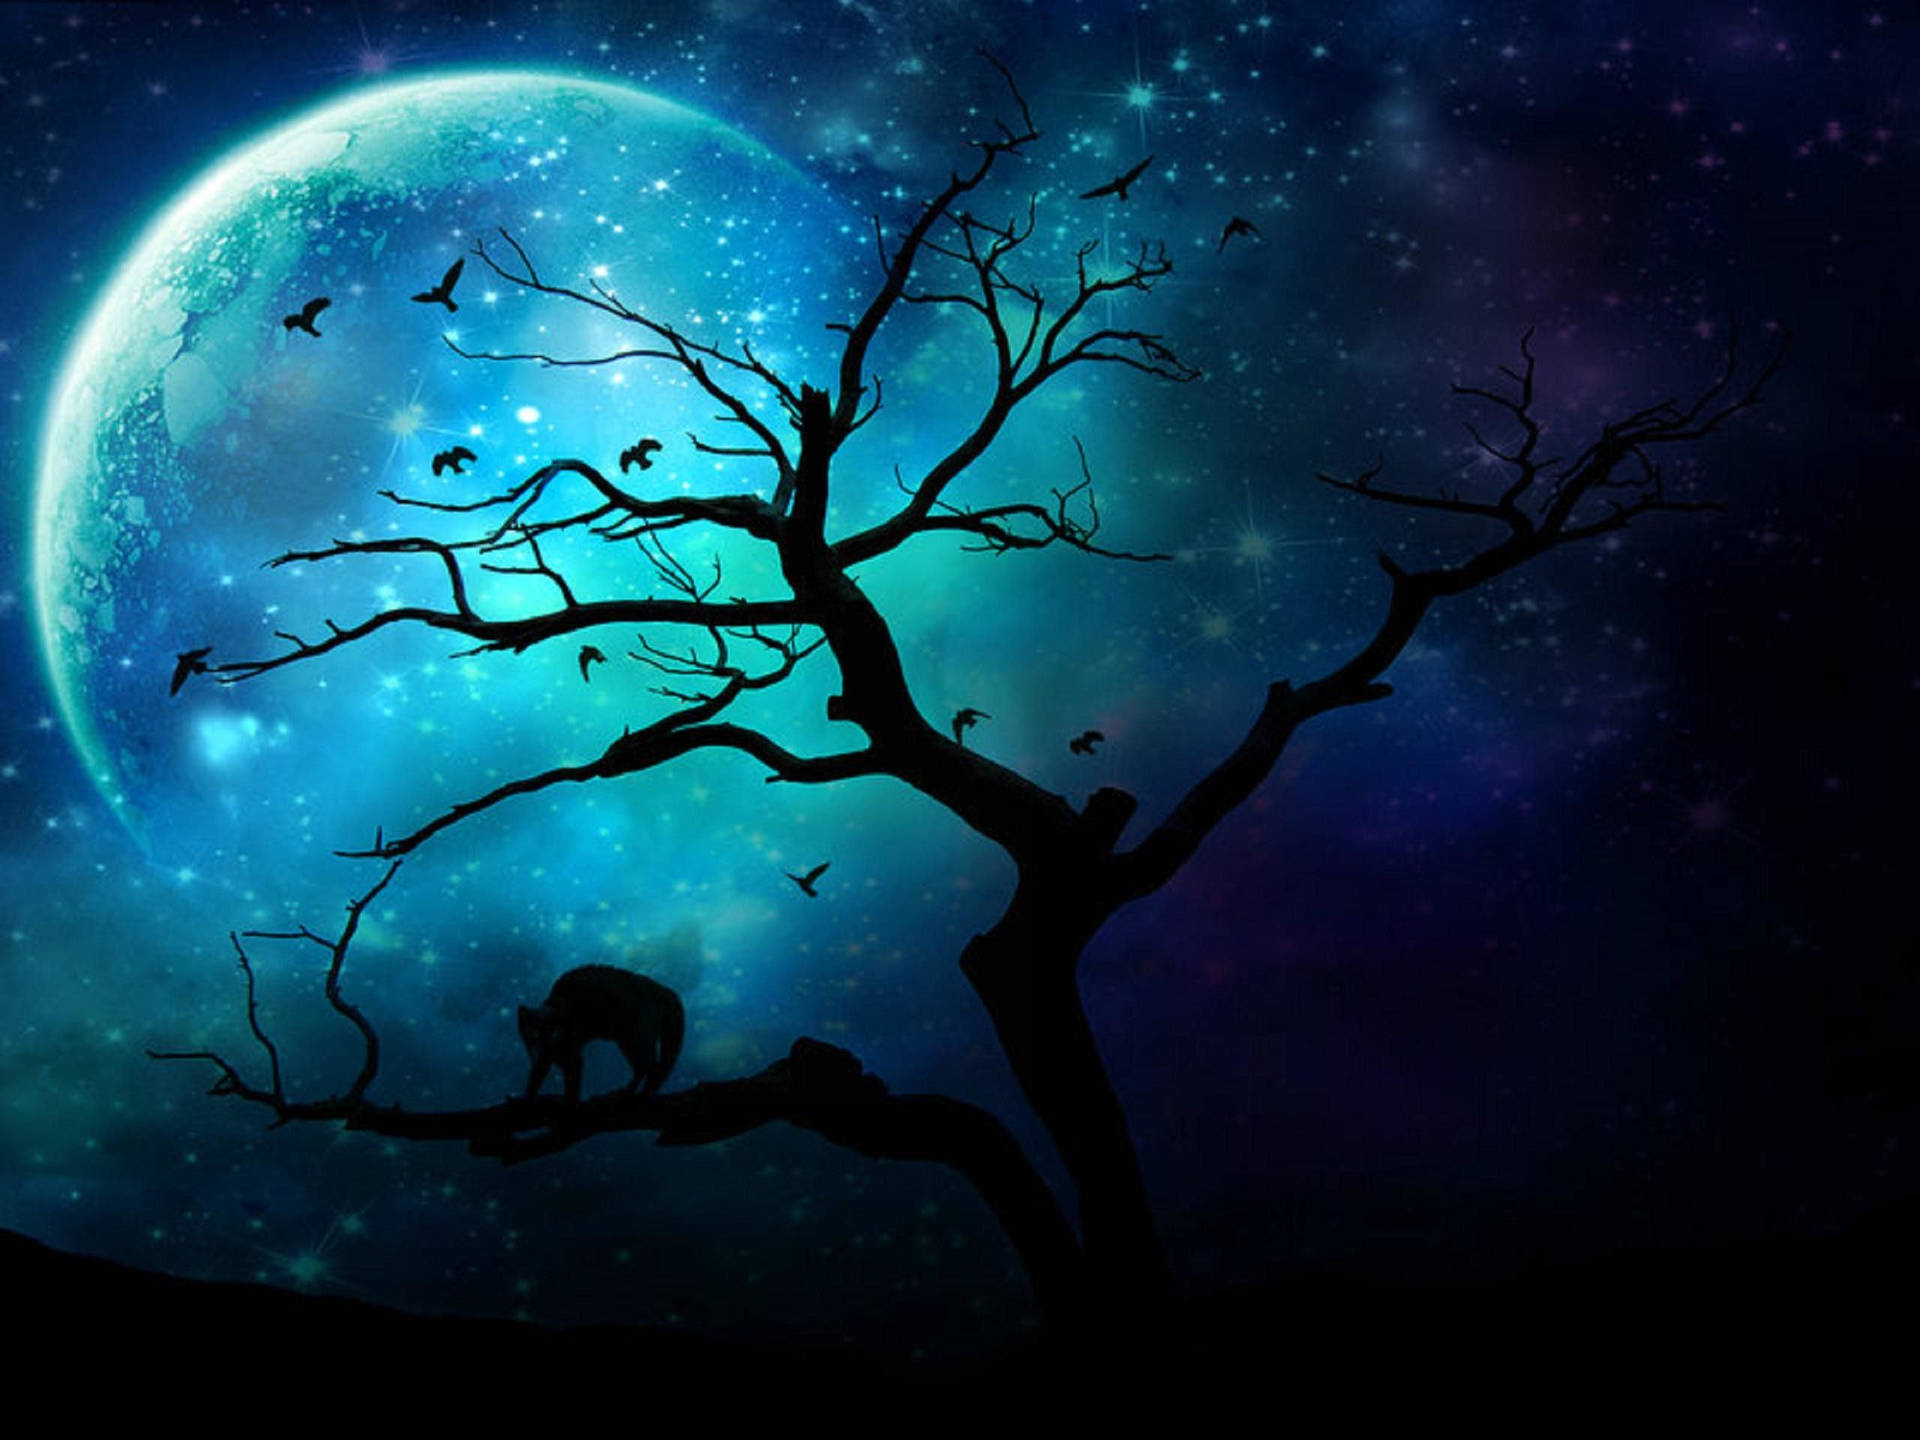 Dark blue moon with black tree branches with flying birds and a scared cat under a magical starry sky.